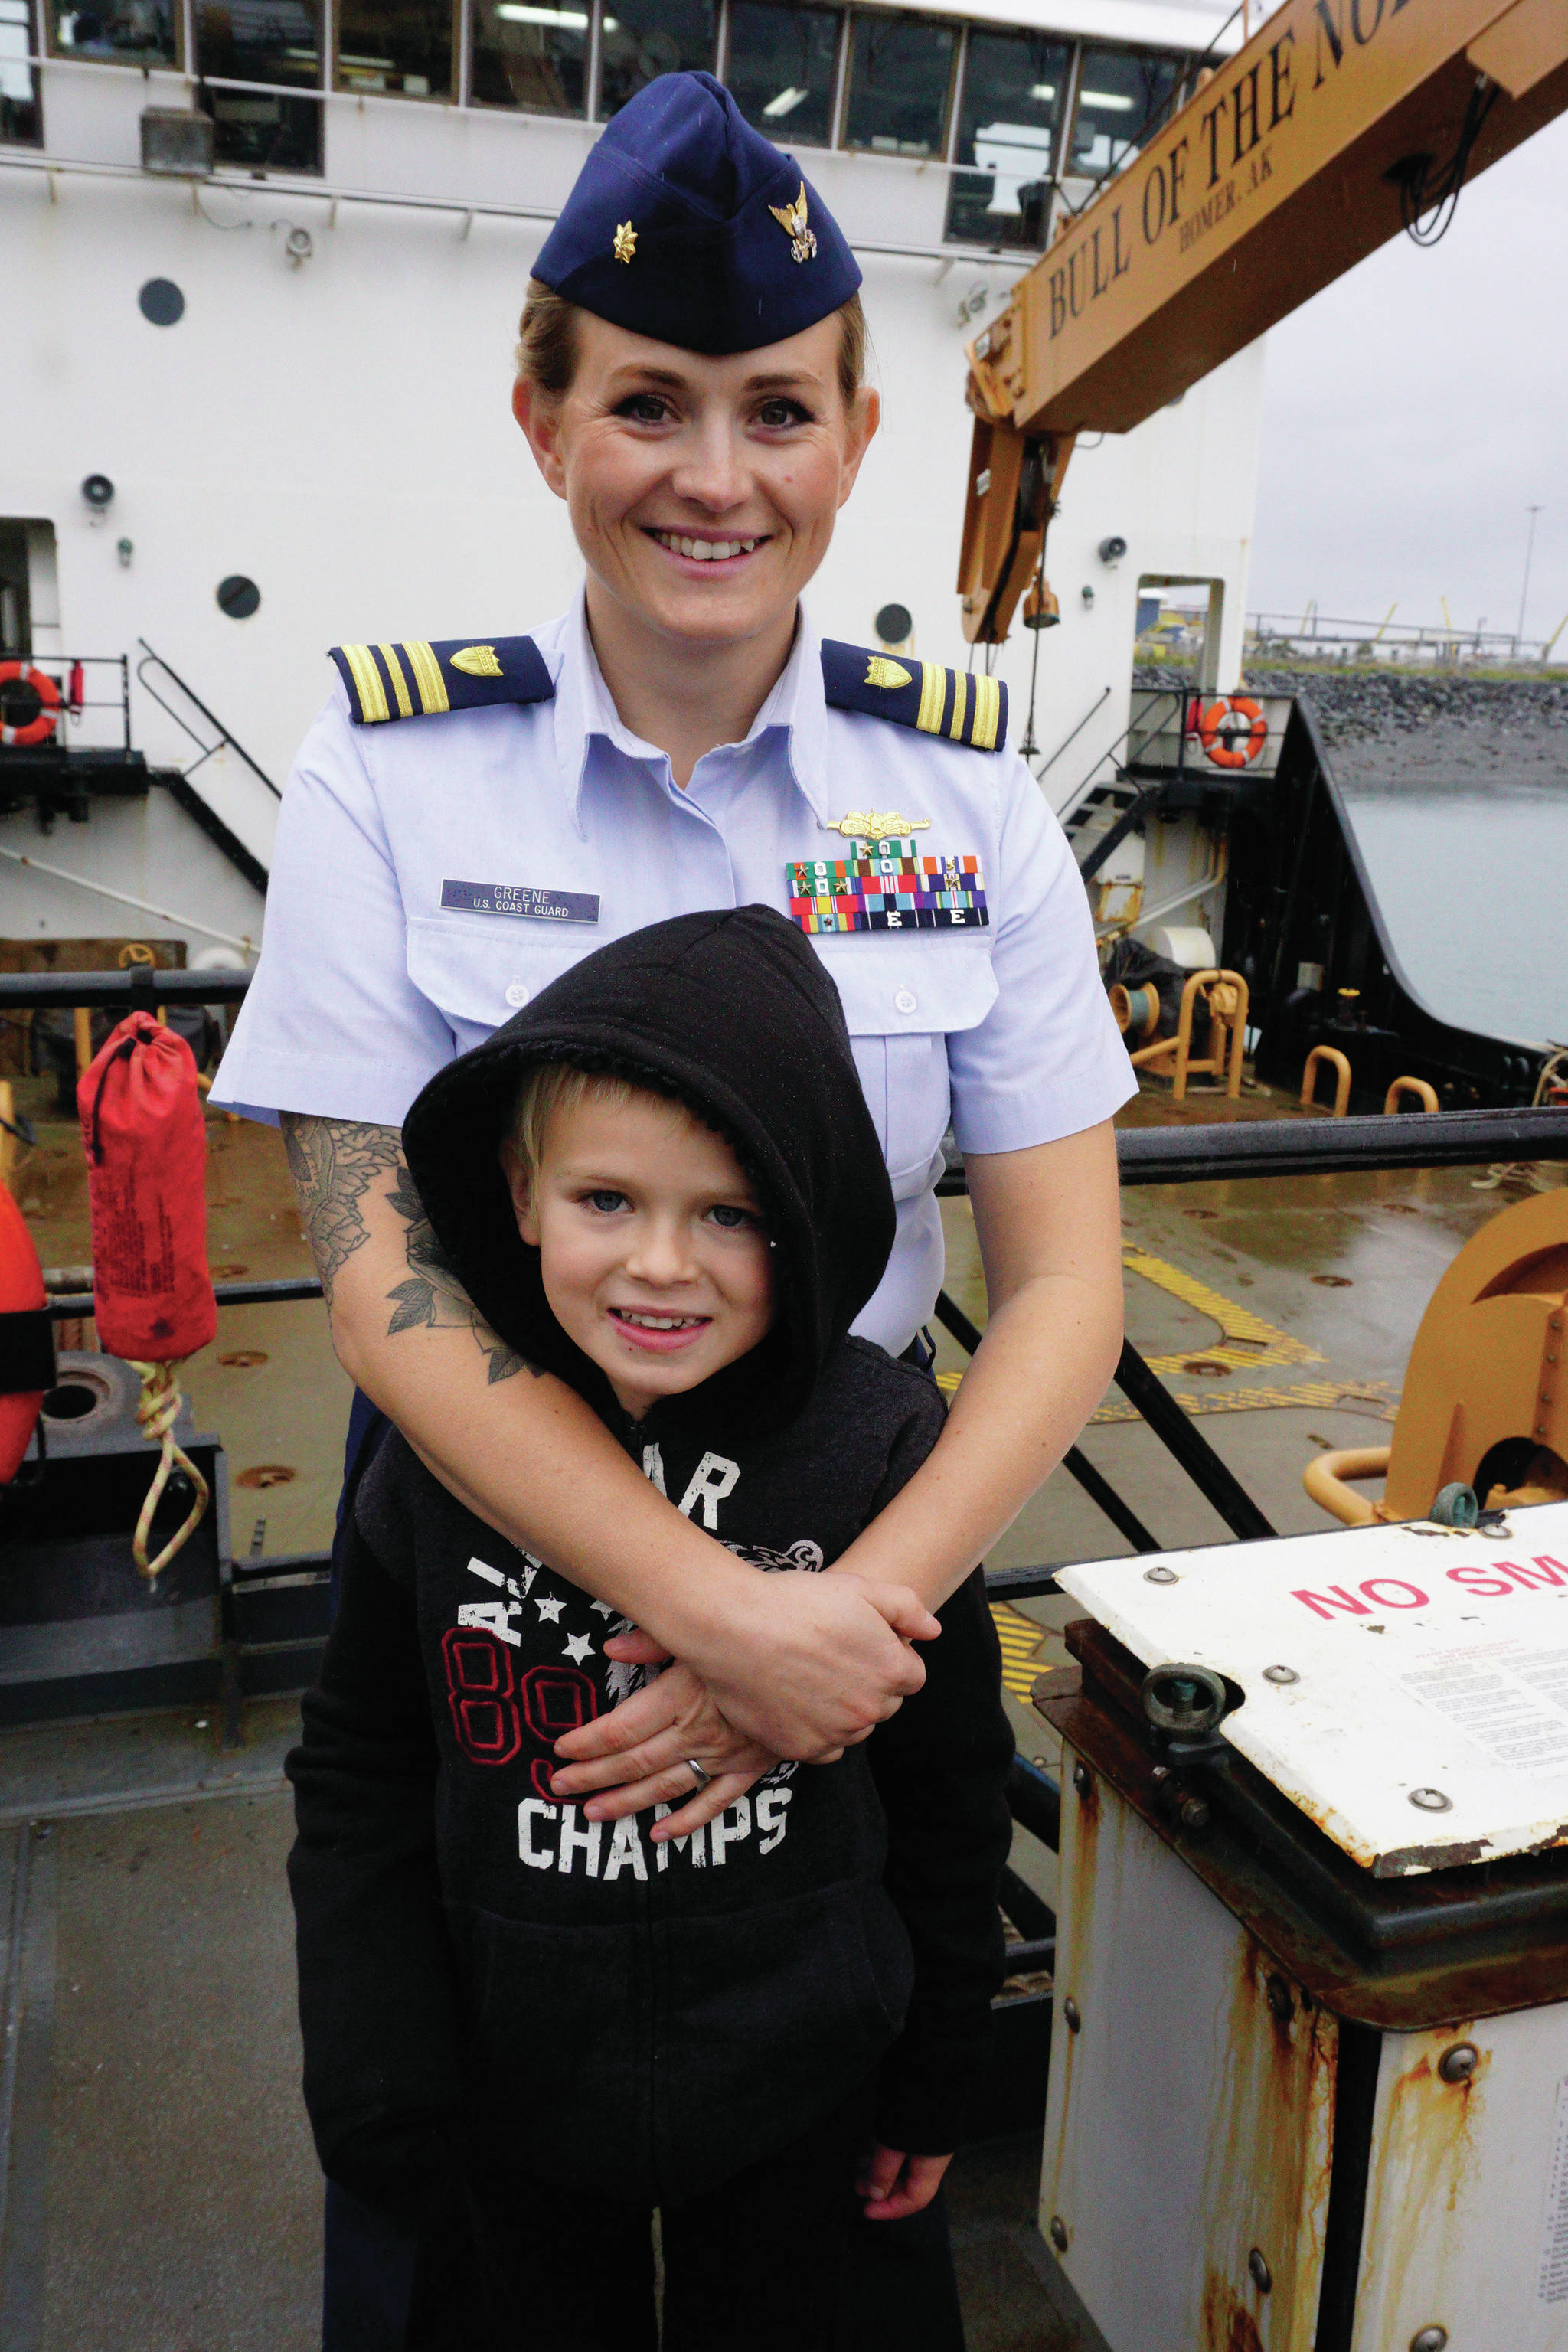 New U.S. Coast Guard Cutter Captain Lt. Cmdr. Jeannette Greene, center, poses with her son, Grady, on the deck of the Hickory after her assumption of command ceremony on Friday, Oct. 4, 2019, at the Pioneer Dock in Homer, Alaska. (Photo by Michael Armstrong/Homer News)